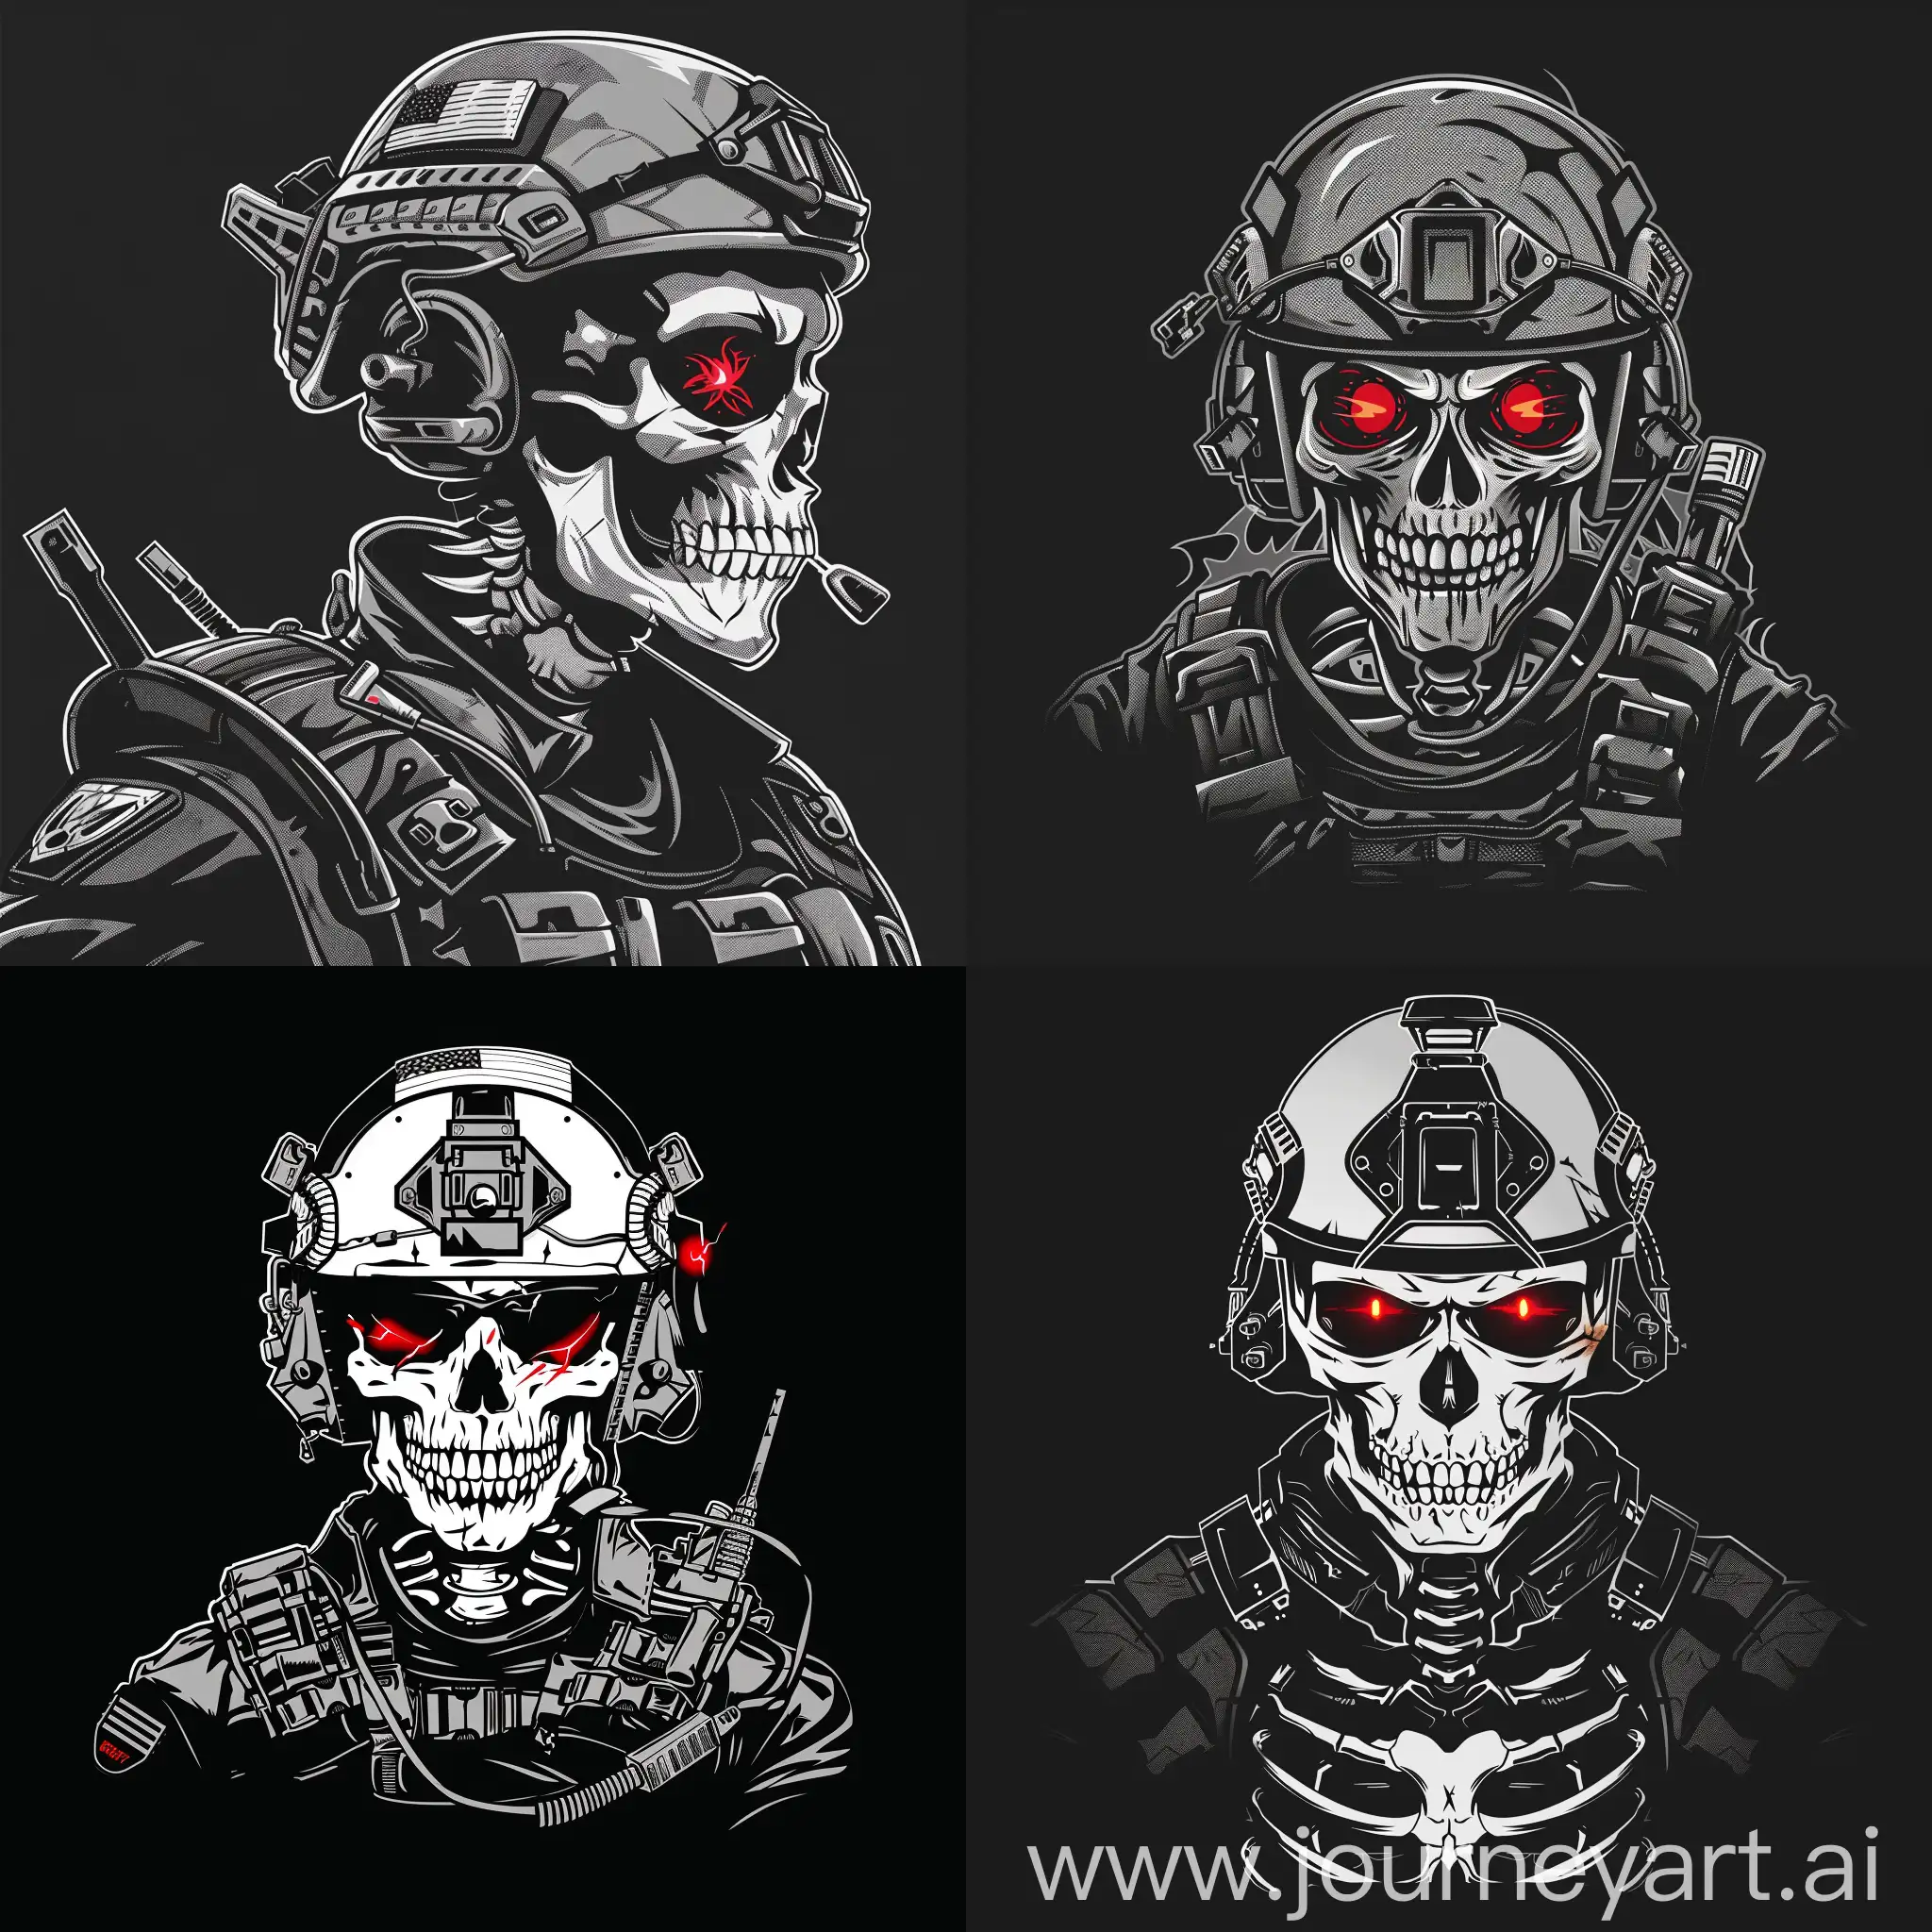 Modern-Military-Undead-Soldiers-RedEyed-Skeletons-with-Burning-Eyes